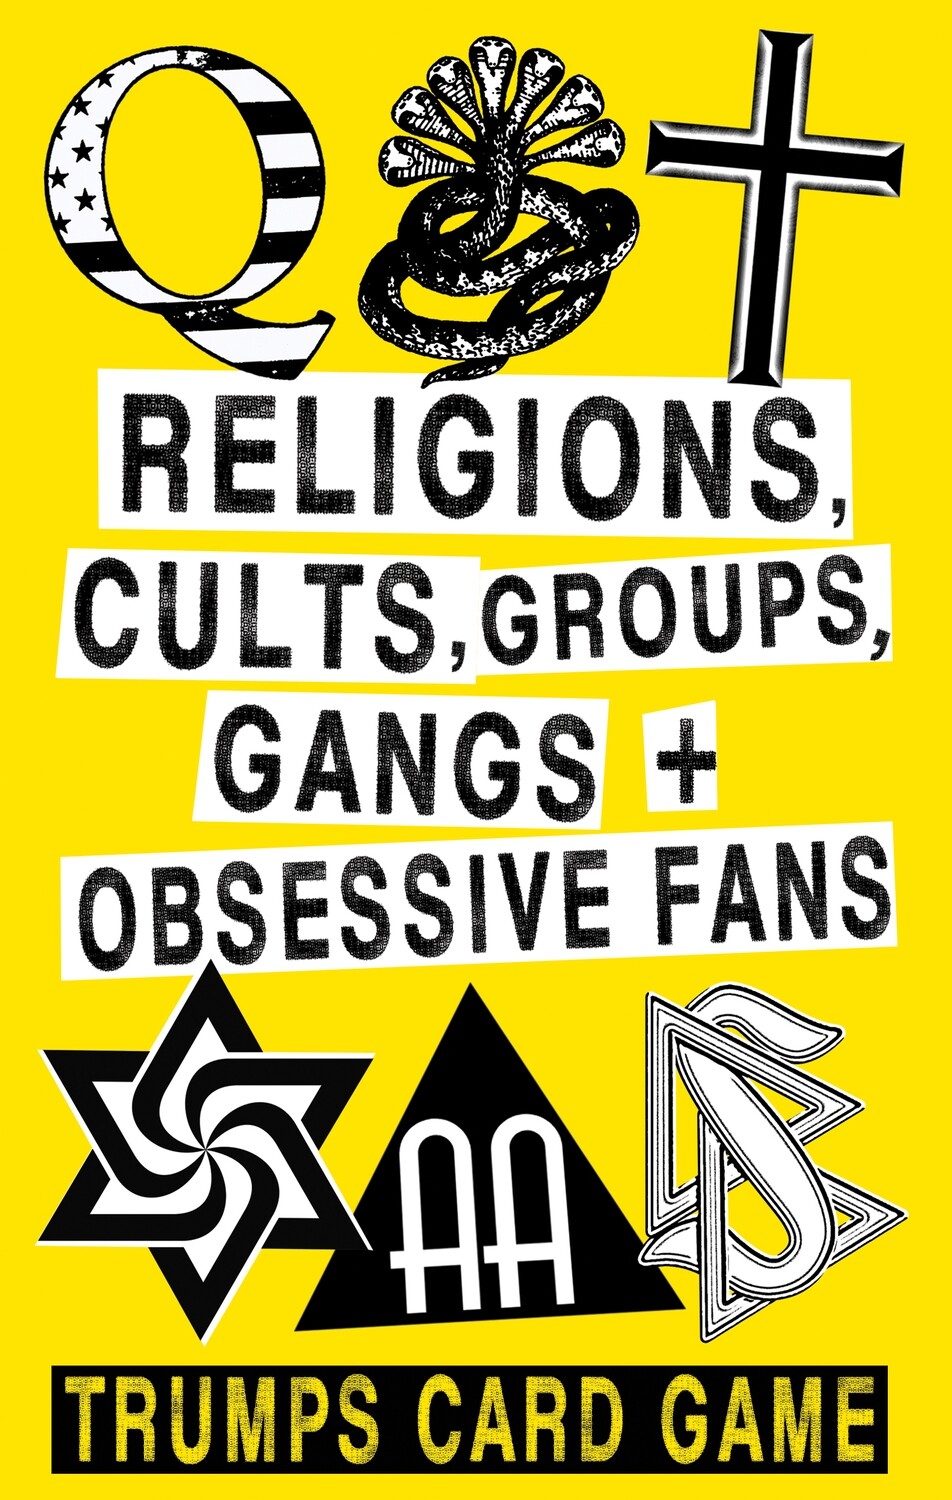 RELIGIONS, CULTS, GROUPS, GANGS AND OBSESSIVE FANS TRUMPS